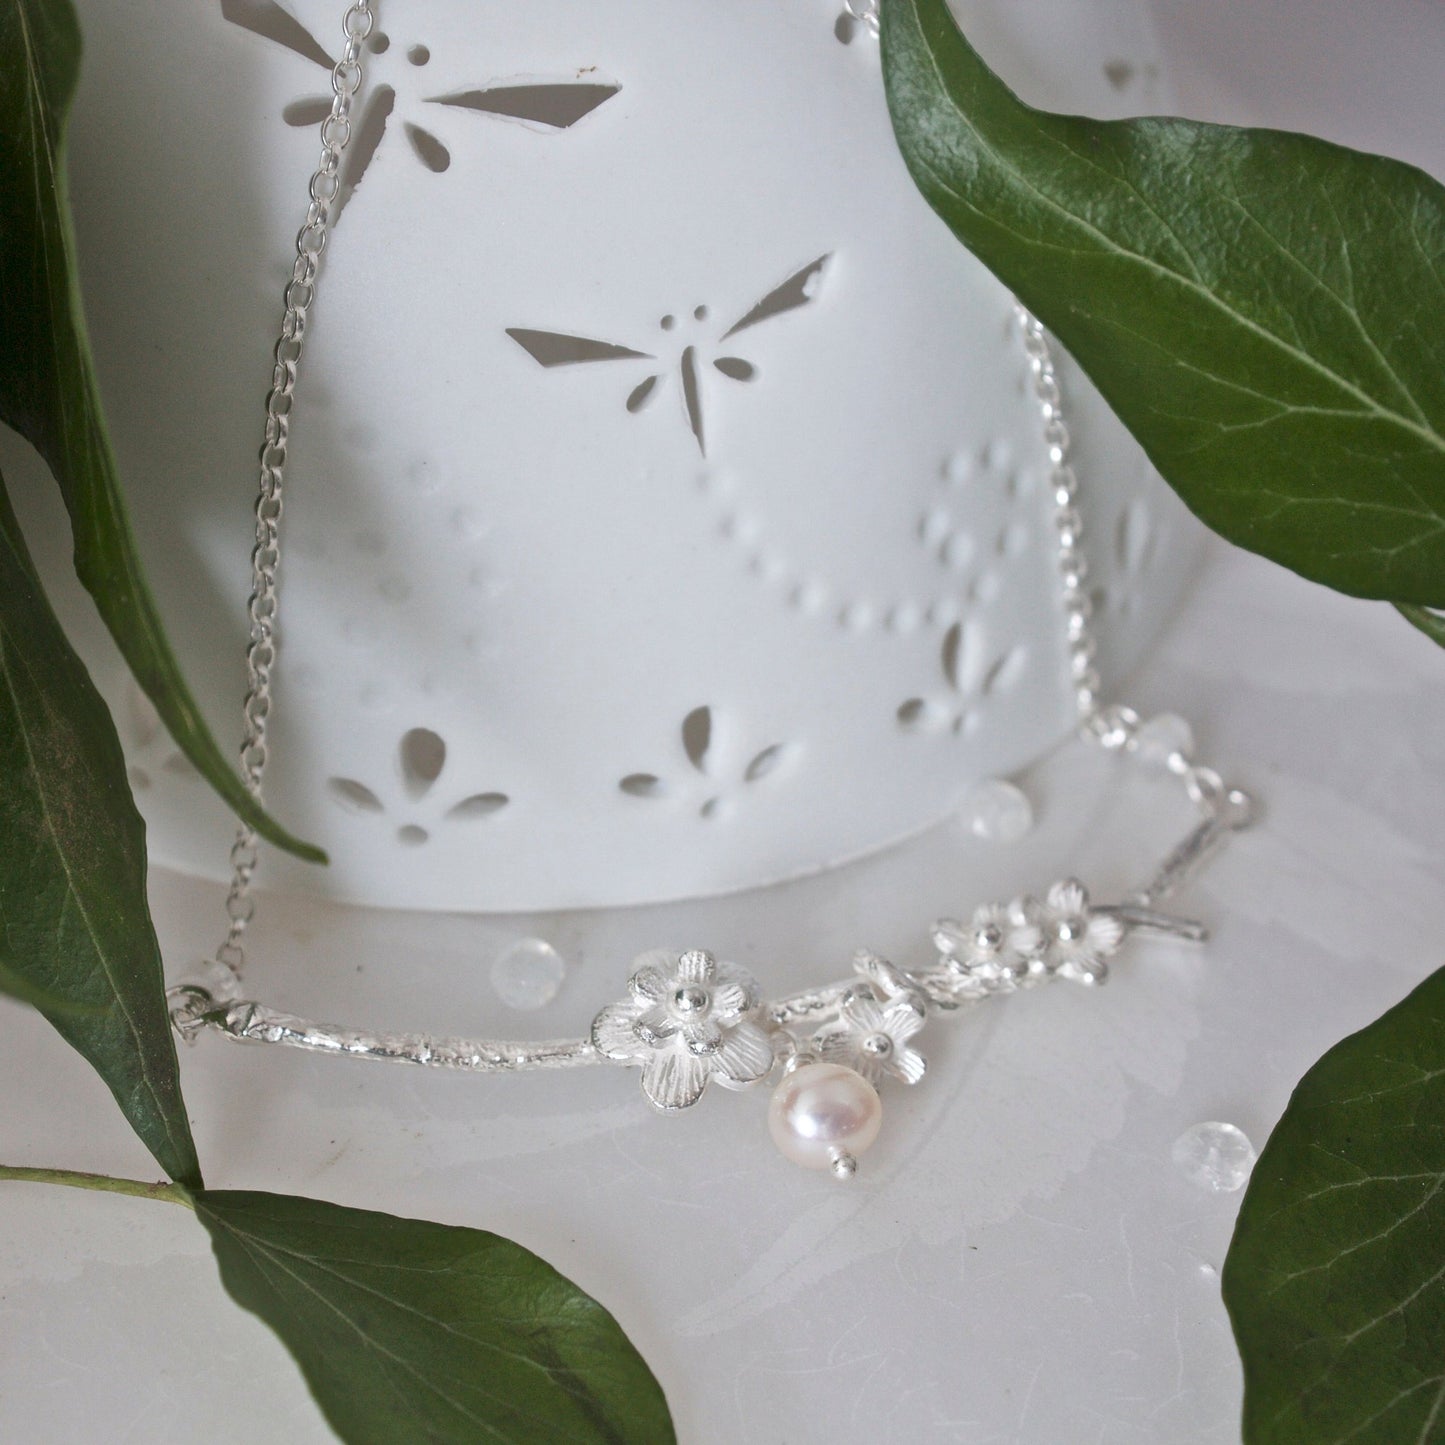 Cherry Blossom Necklace, Silver, Pearl and Moonstone Bridal Necklace